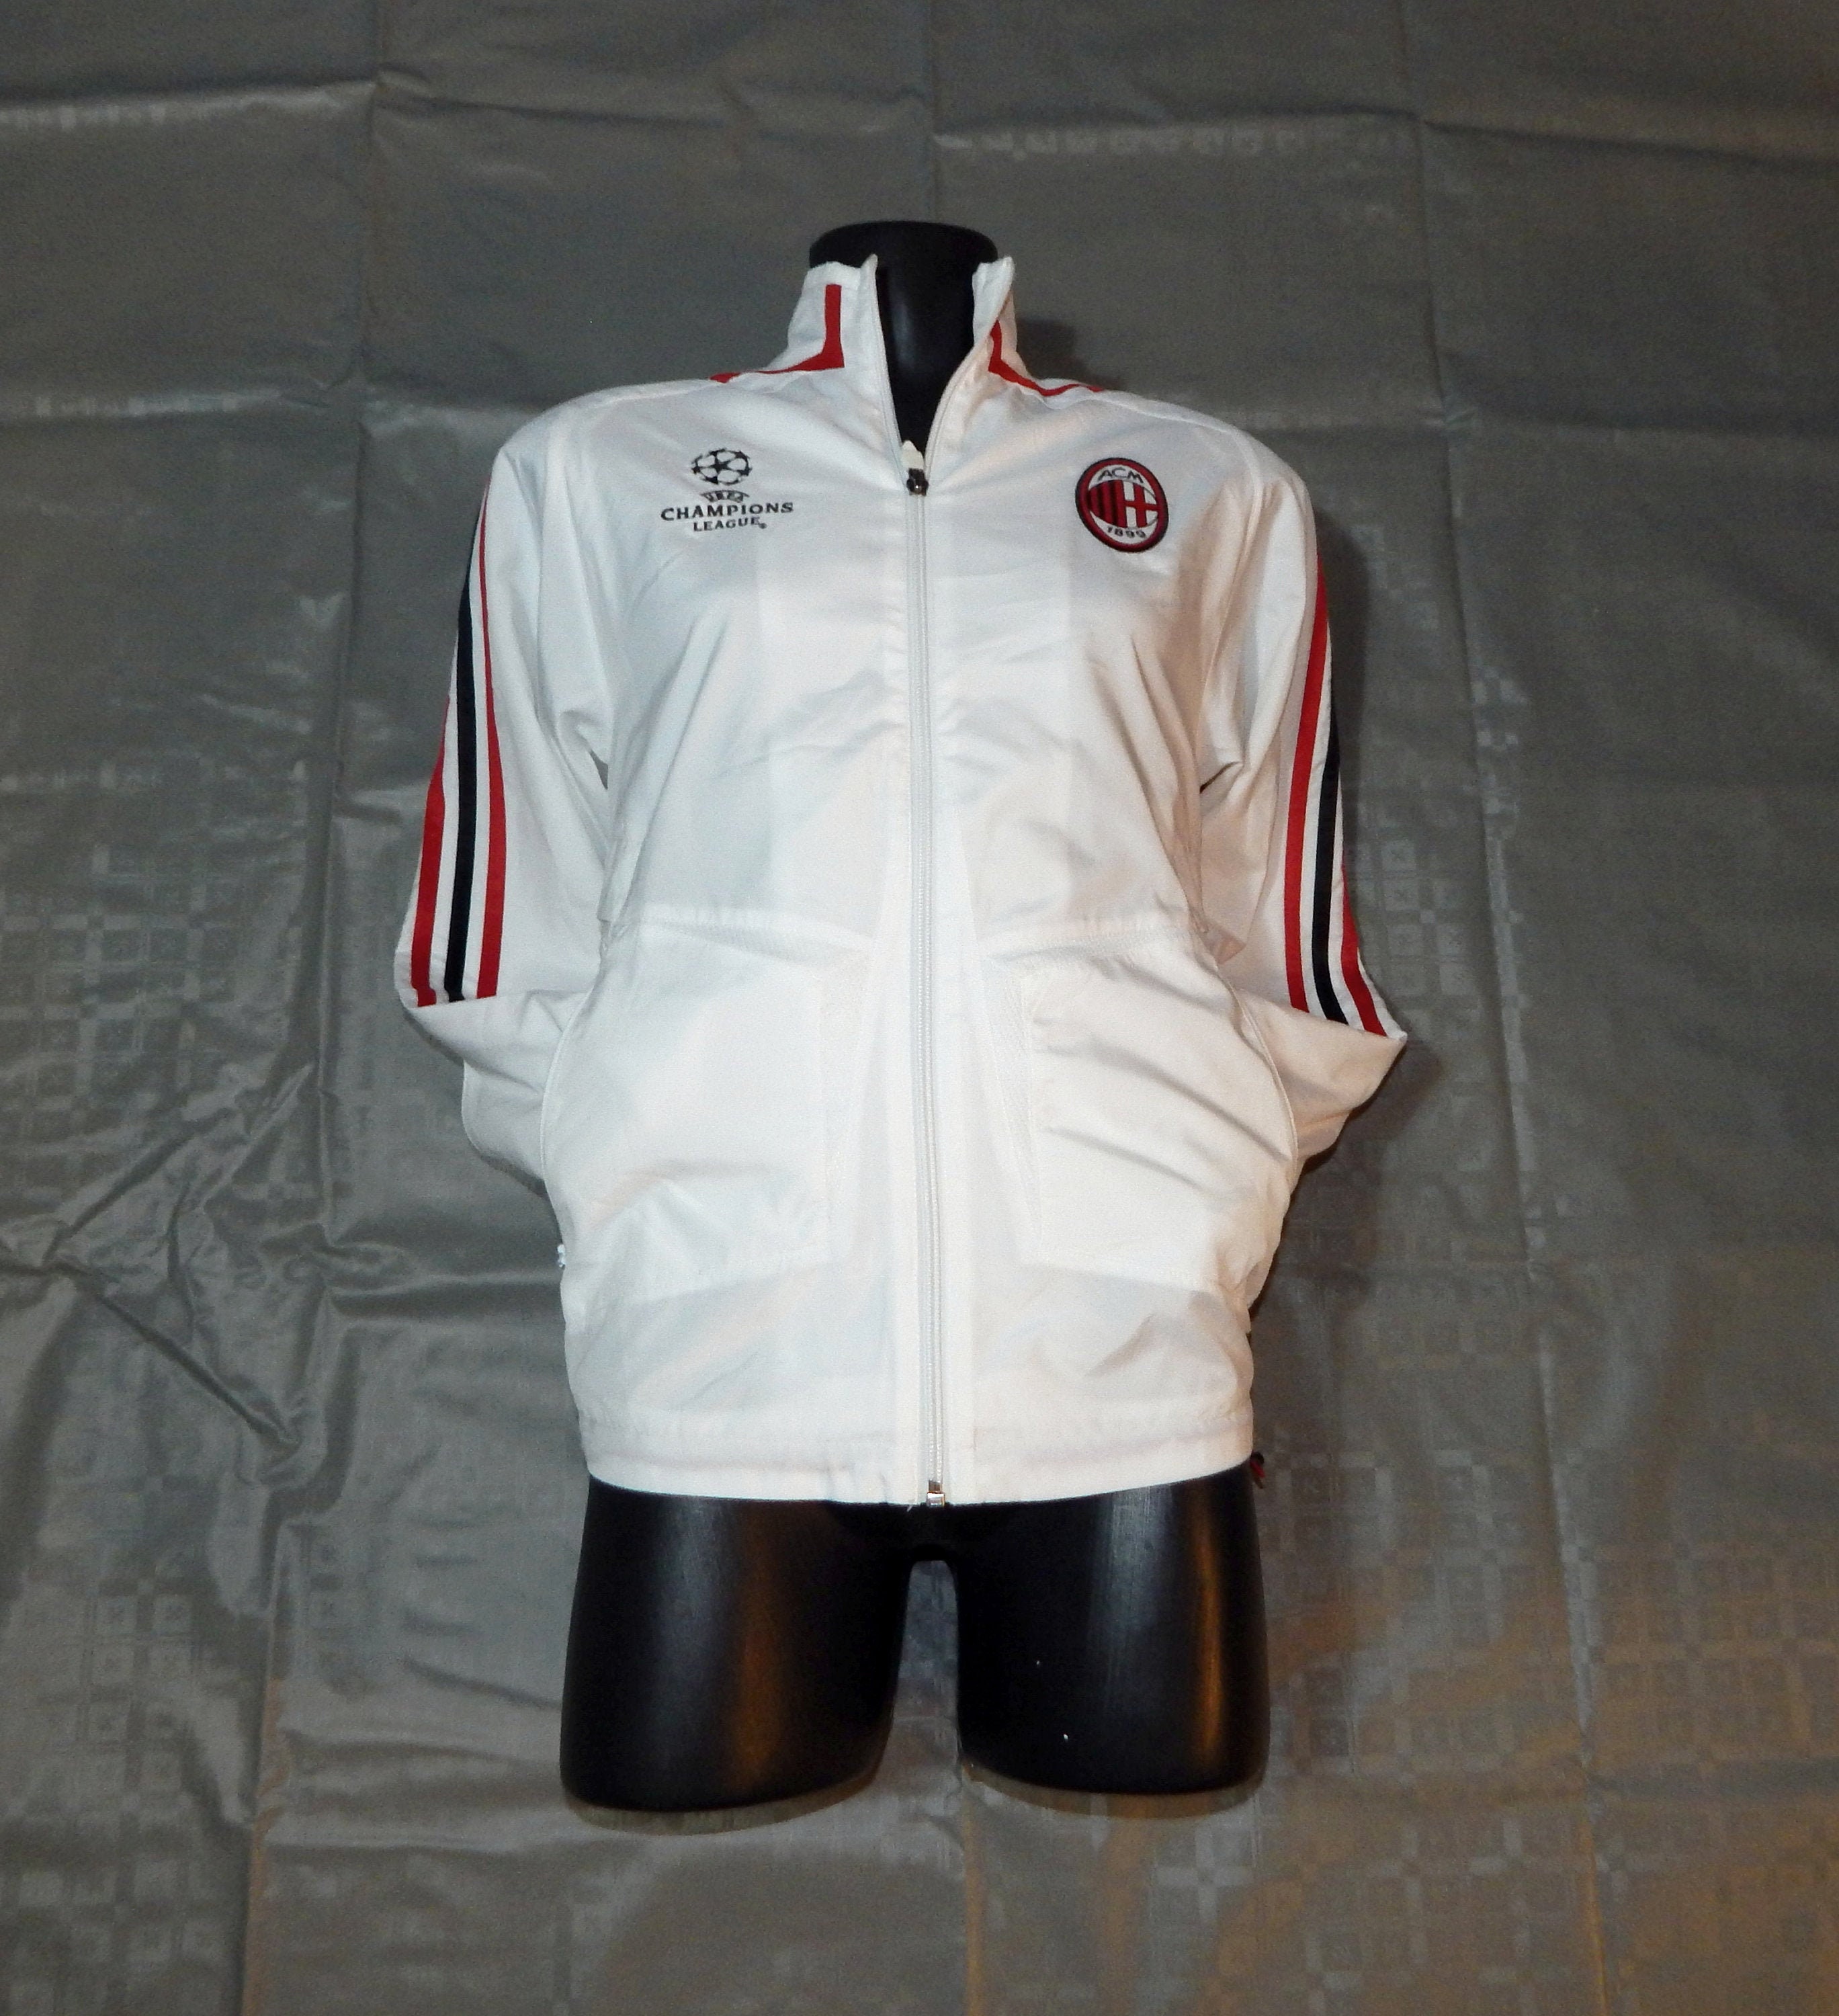 scents and crafts Men's AC-Milan Off-White Varsity Jacket | Football Club  AC-Milan Jacket at  Men’s Clothing store